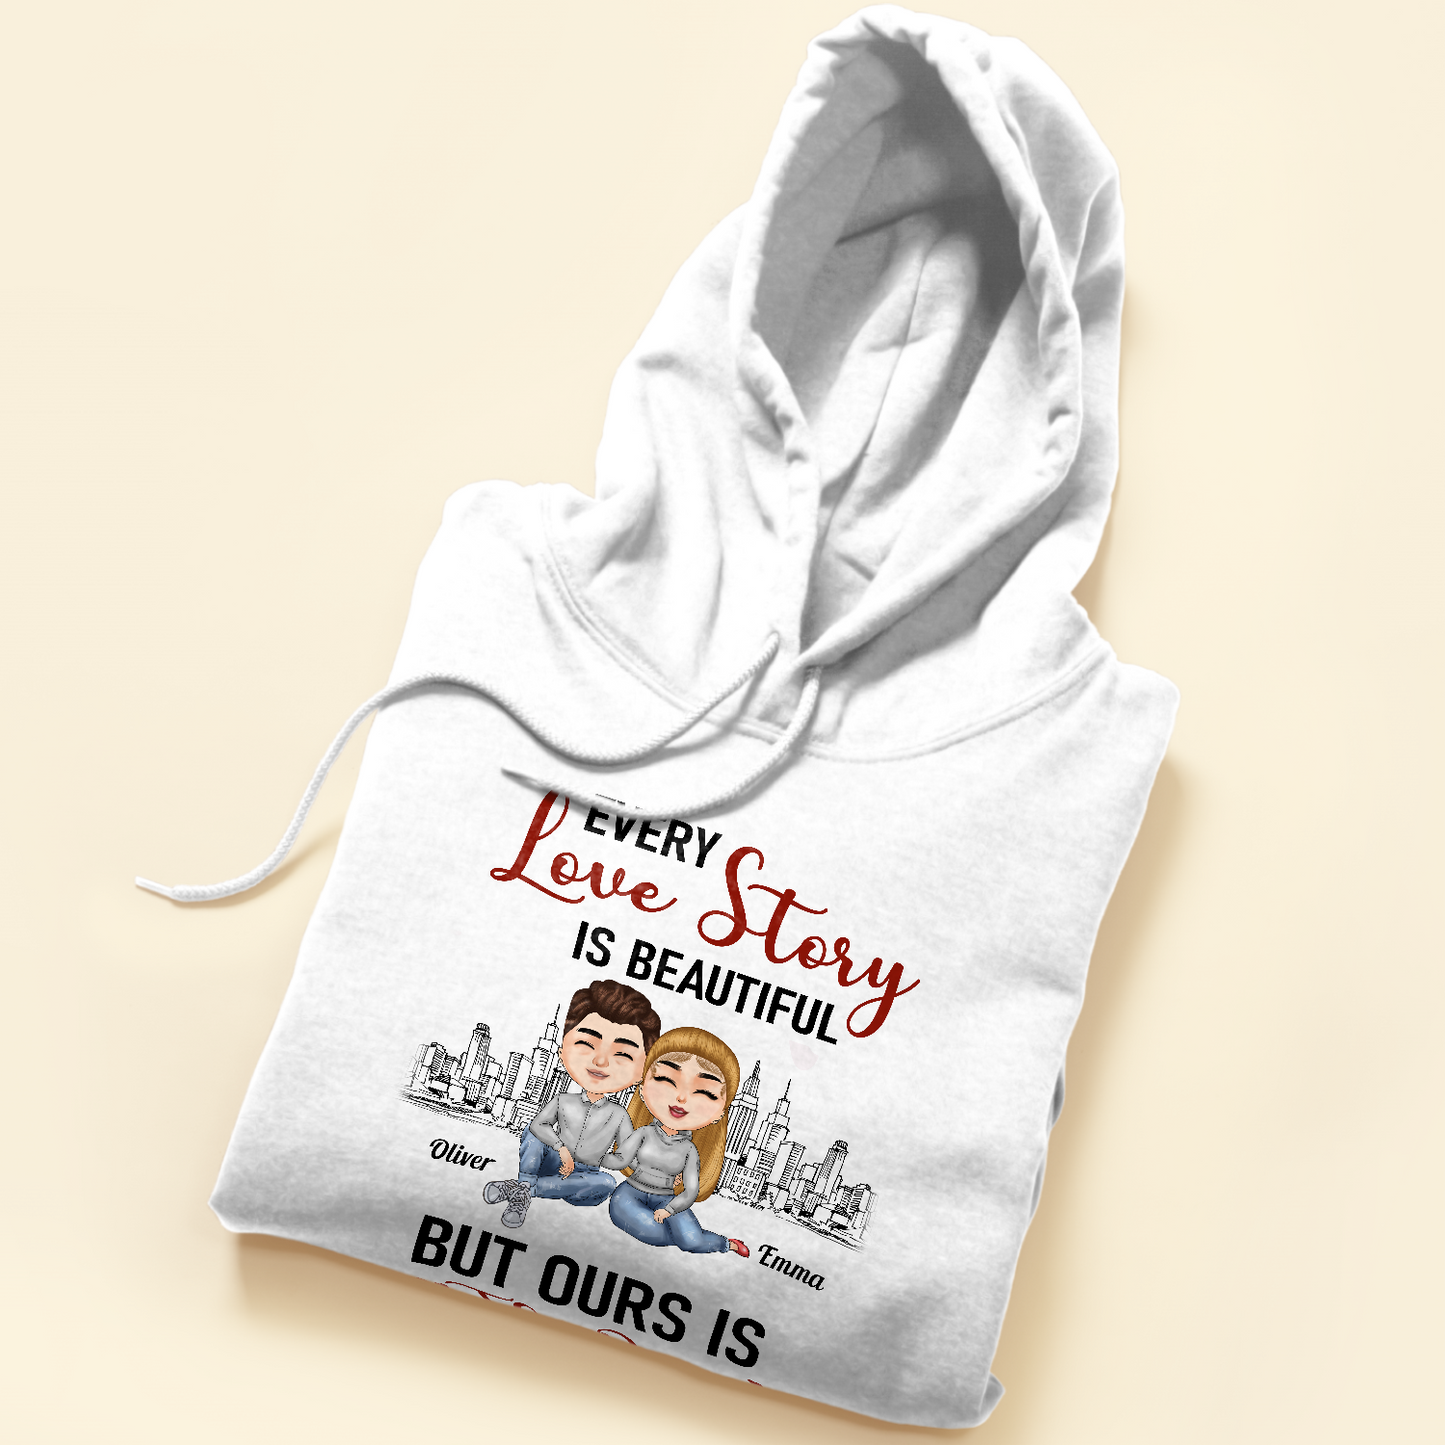 Every Love Story Is Beautiful But Ours Is The Best - Personalized Shirt - Anniversary, Valentine's Day, Birthday Gift For Couples, Lovers, Husband & Wife